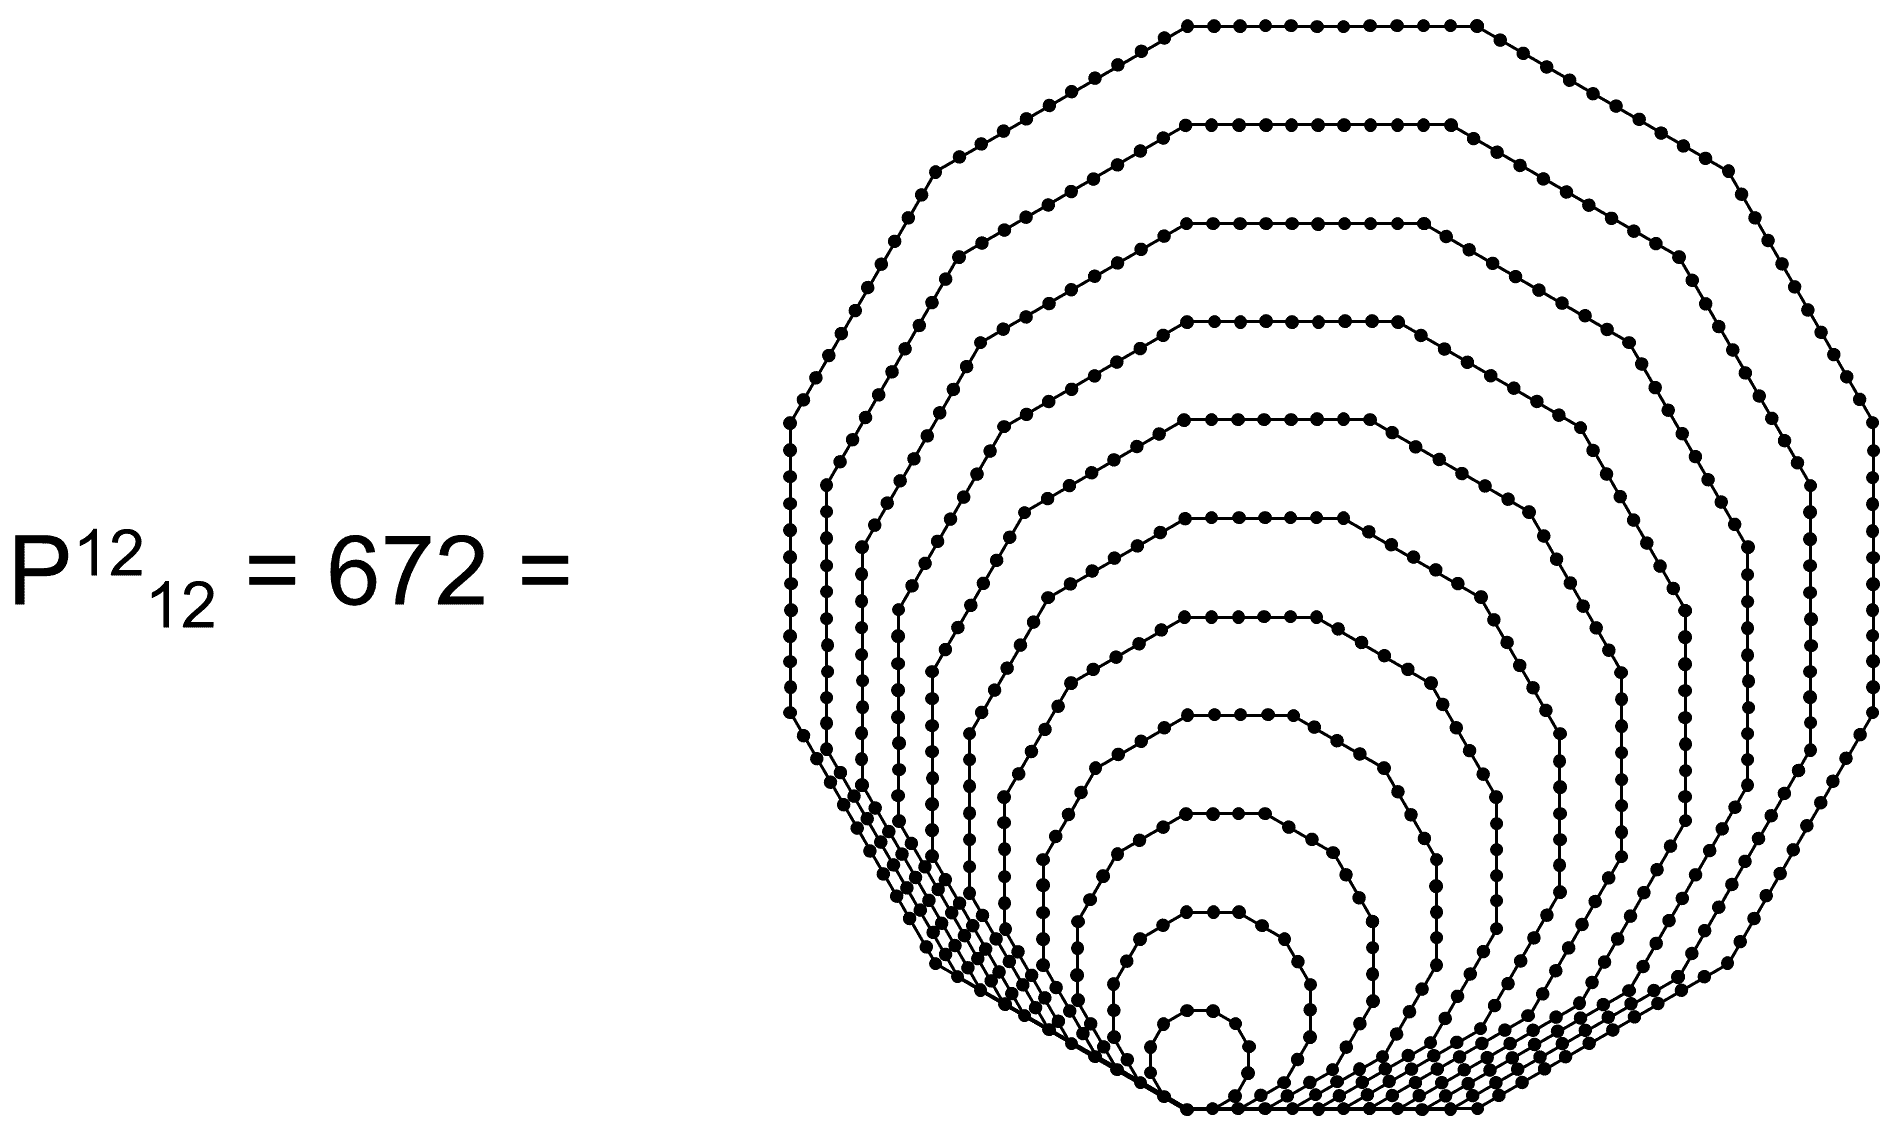 672 as 12th dodecagonal number